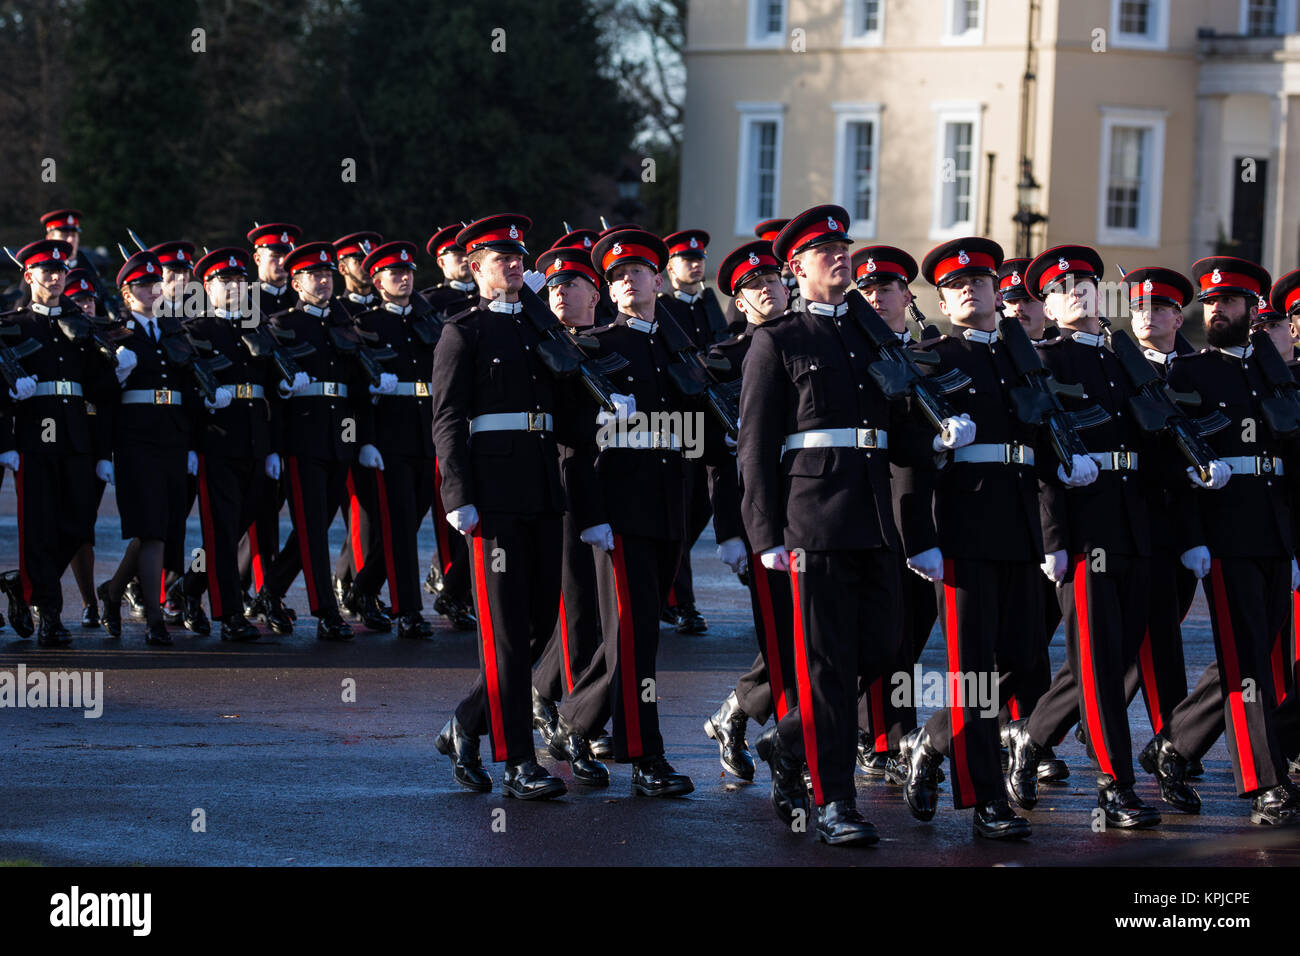 Sandhurst, UK. 14th December, 2017. The Sovereign’s Parade at the Royal Military Academy in Sandhurst. The Sovereign’s Parade marks the passing out from Sandhurst following the completion of a year’s intensive training of 162 officer cadets from the UK and 25 from 20 overseas countries. The first parade was held in July 1948. Stock Photo